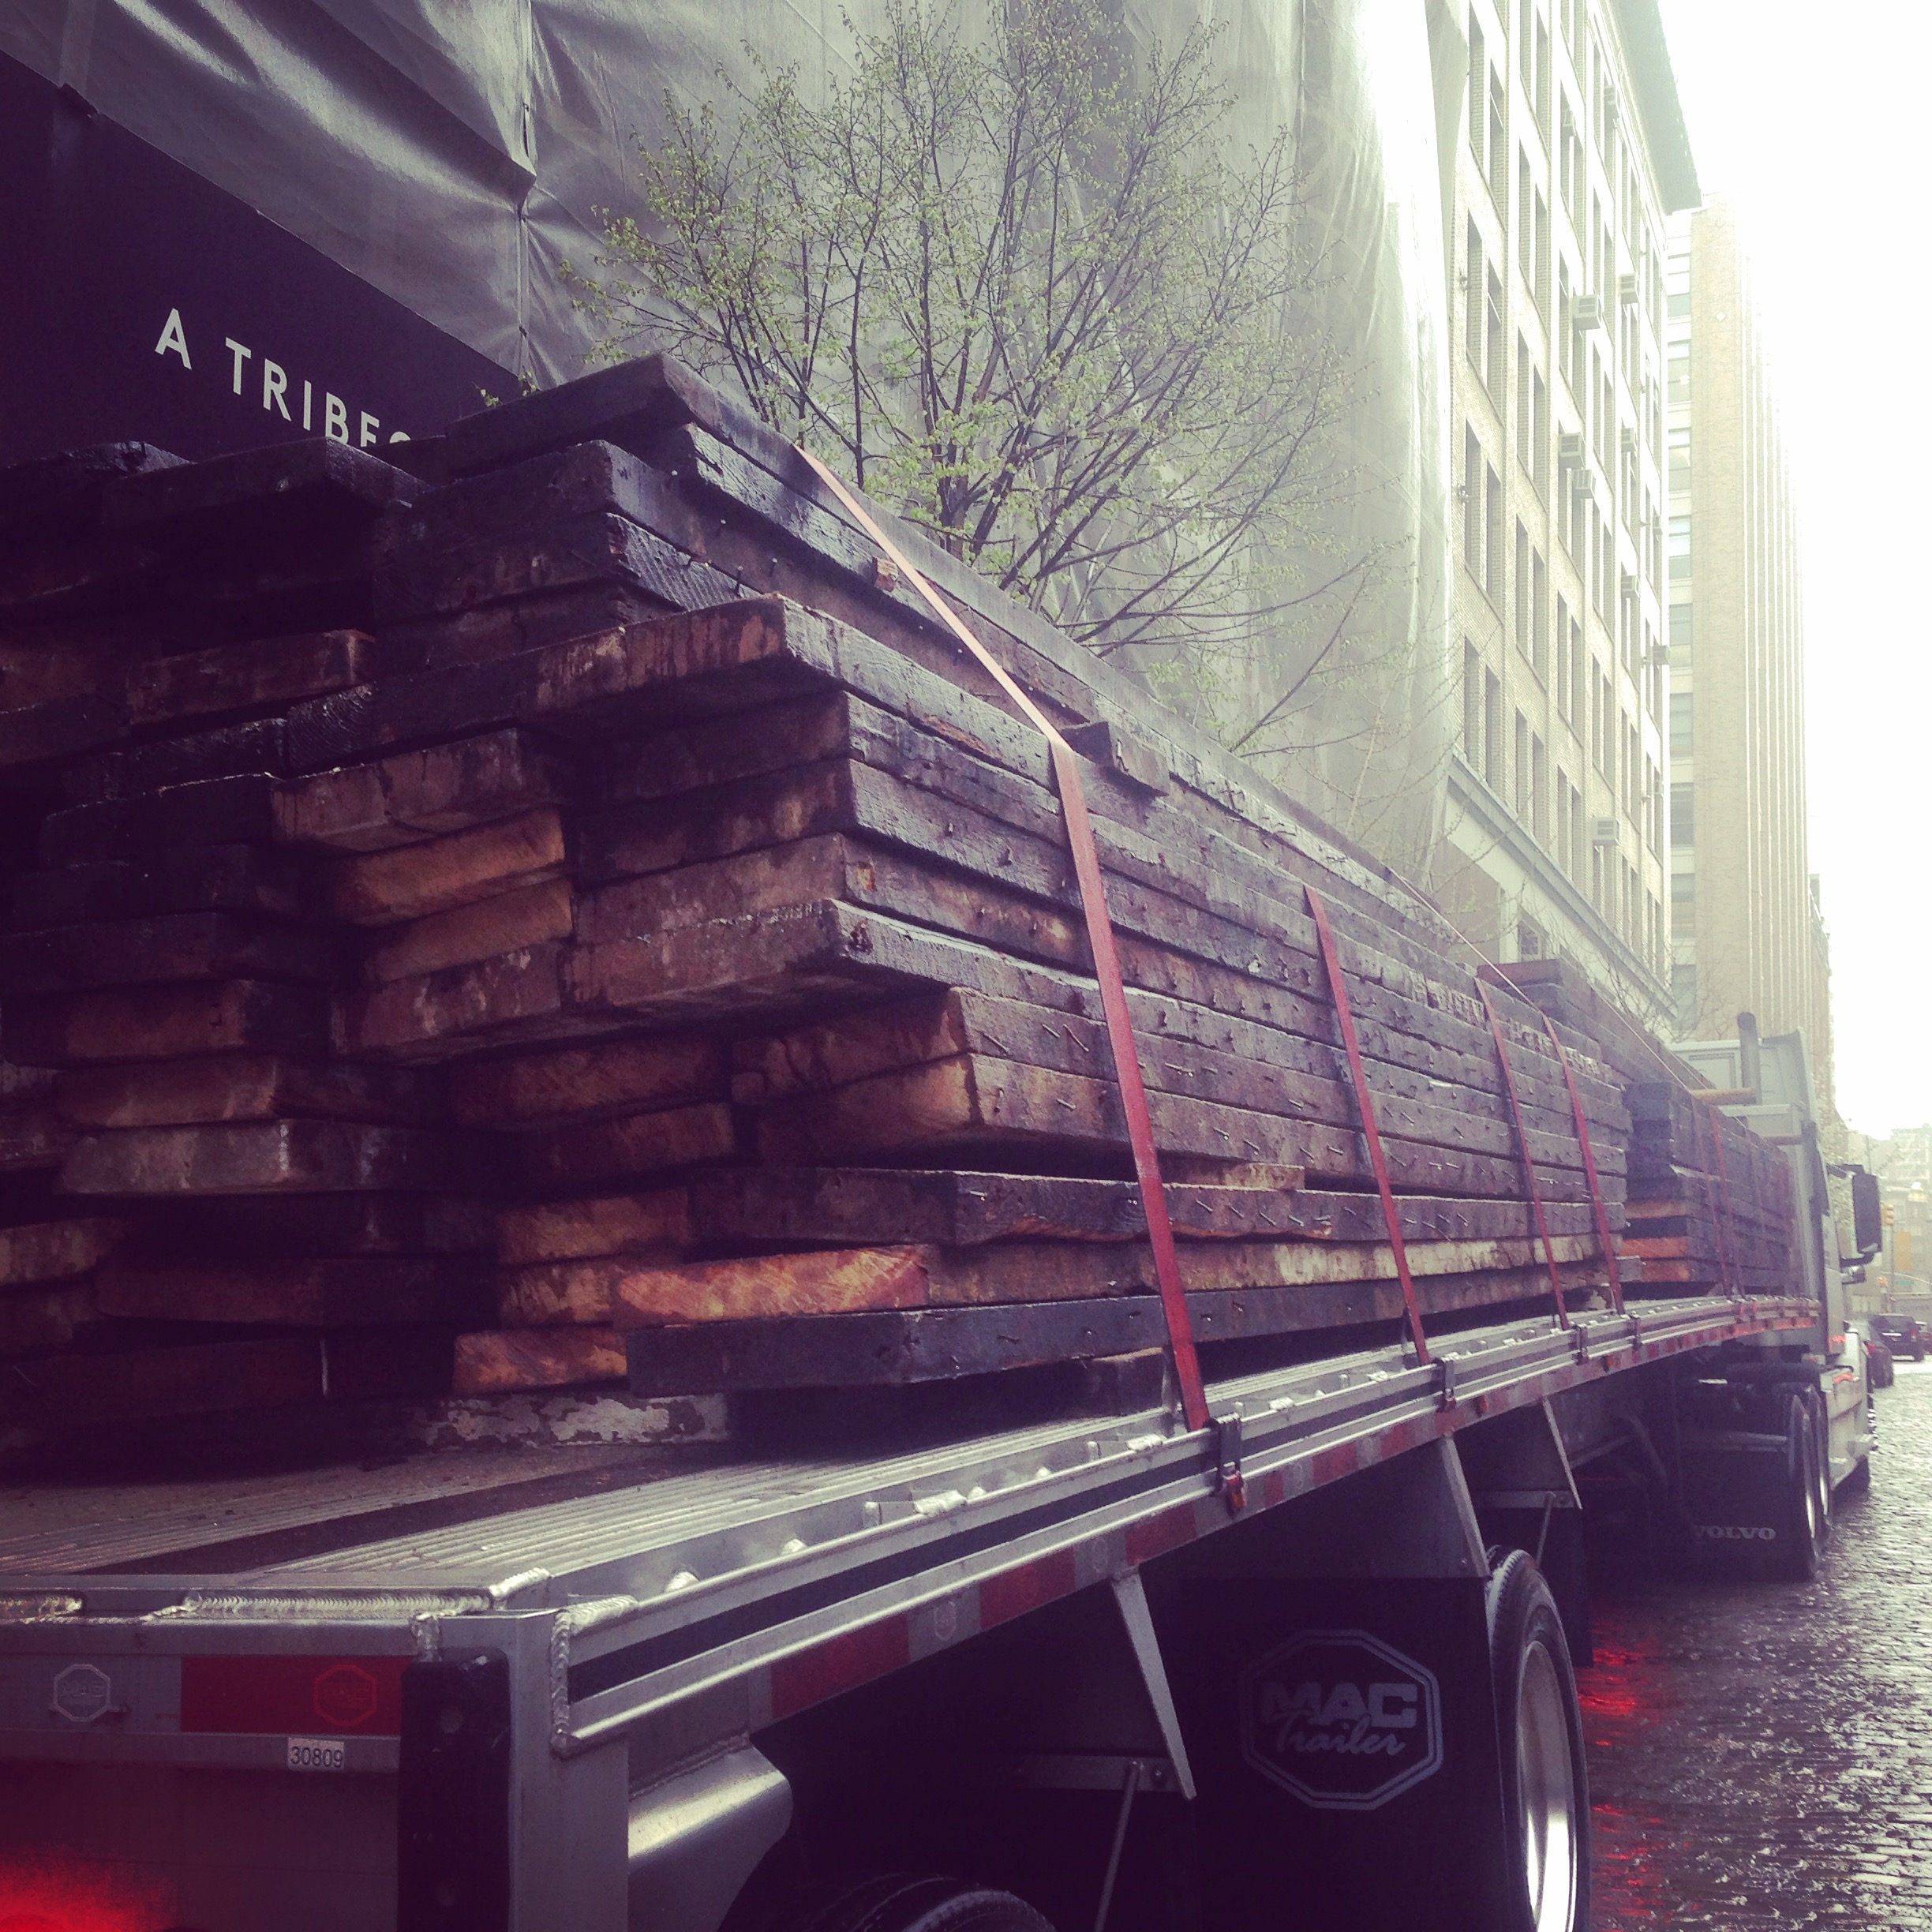 reclaimed lumber from Greenwich St. NYC